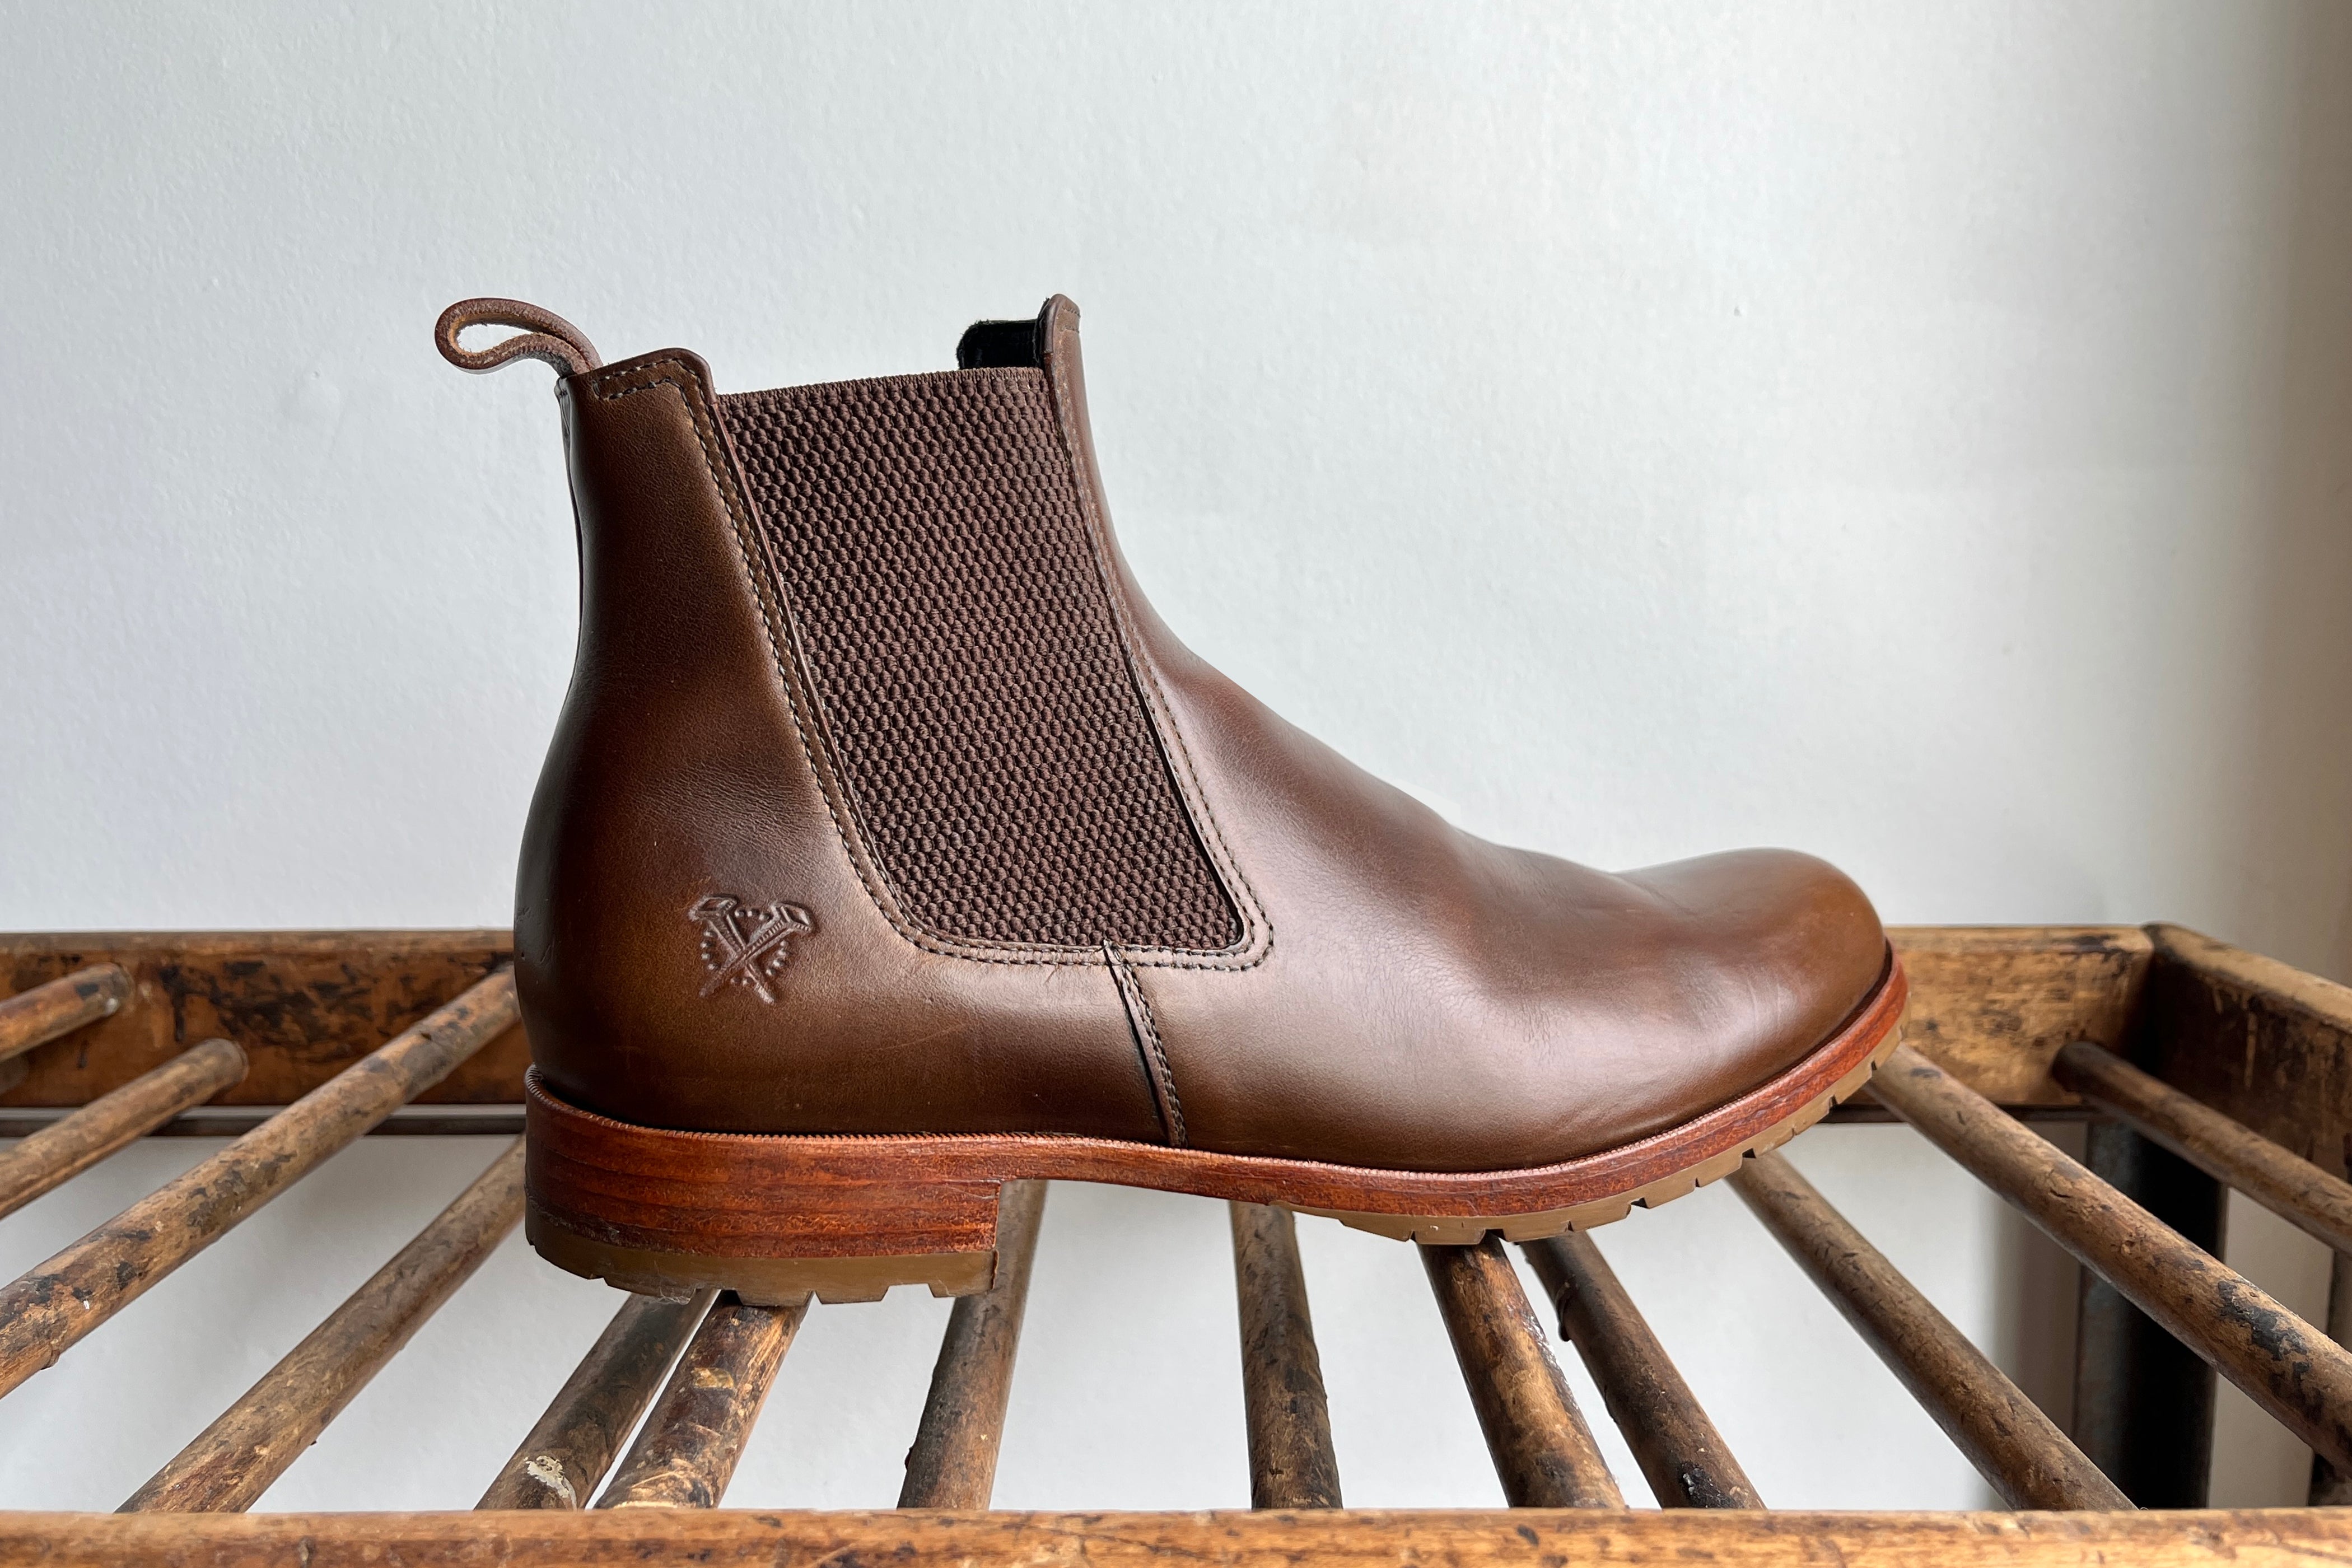 1984 Chelsea Boots - 1984-50-25